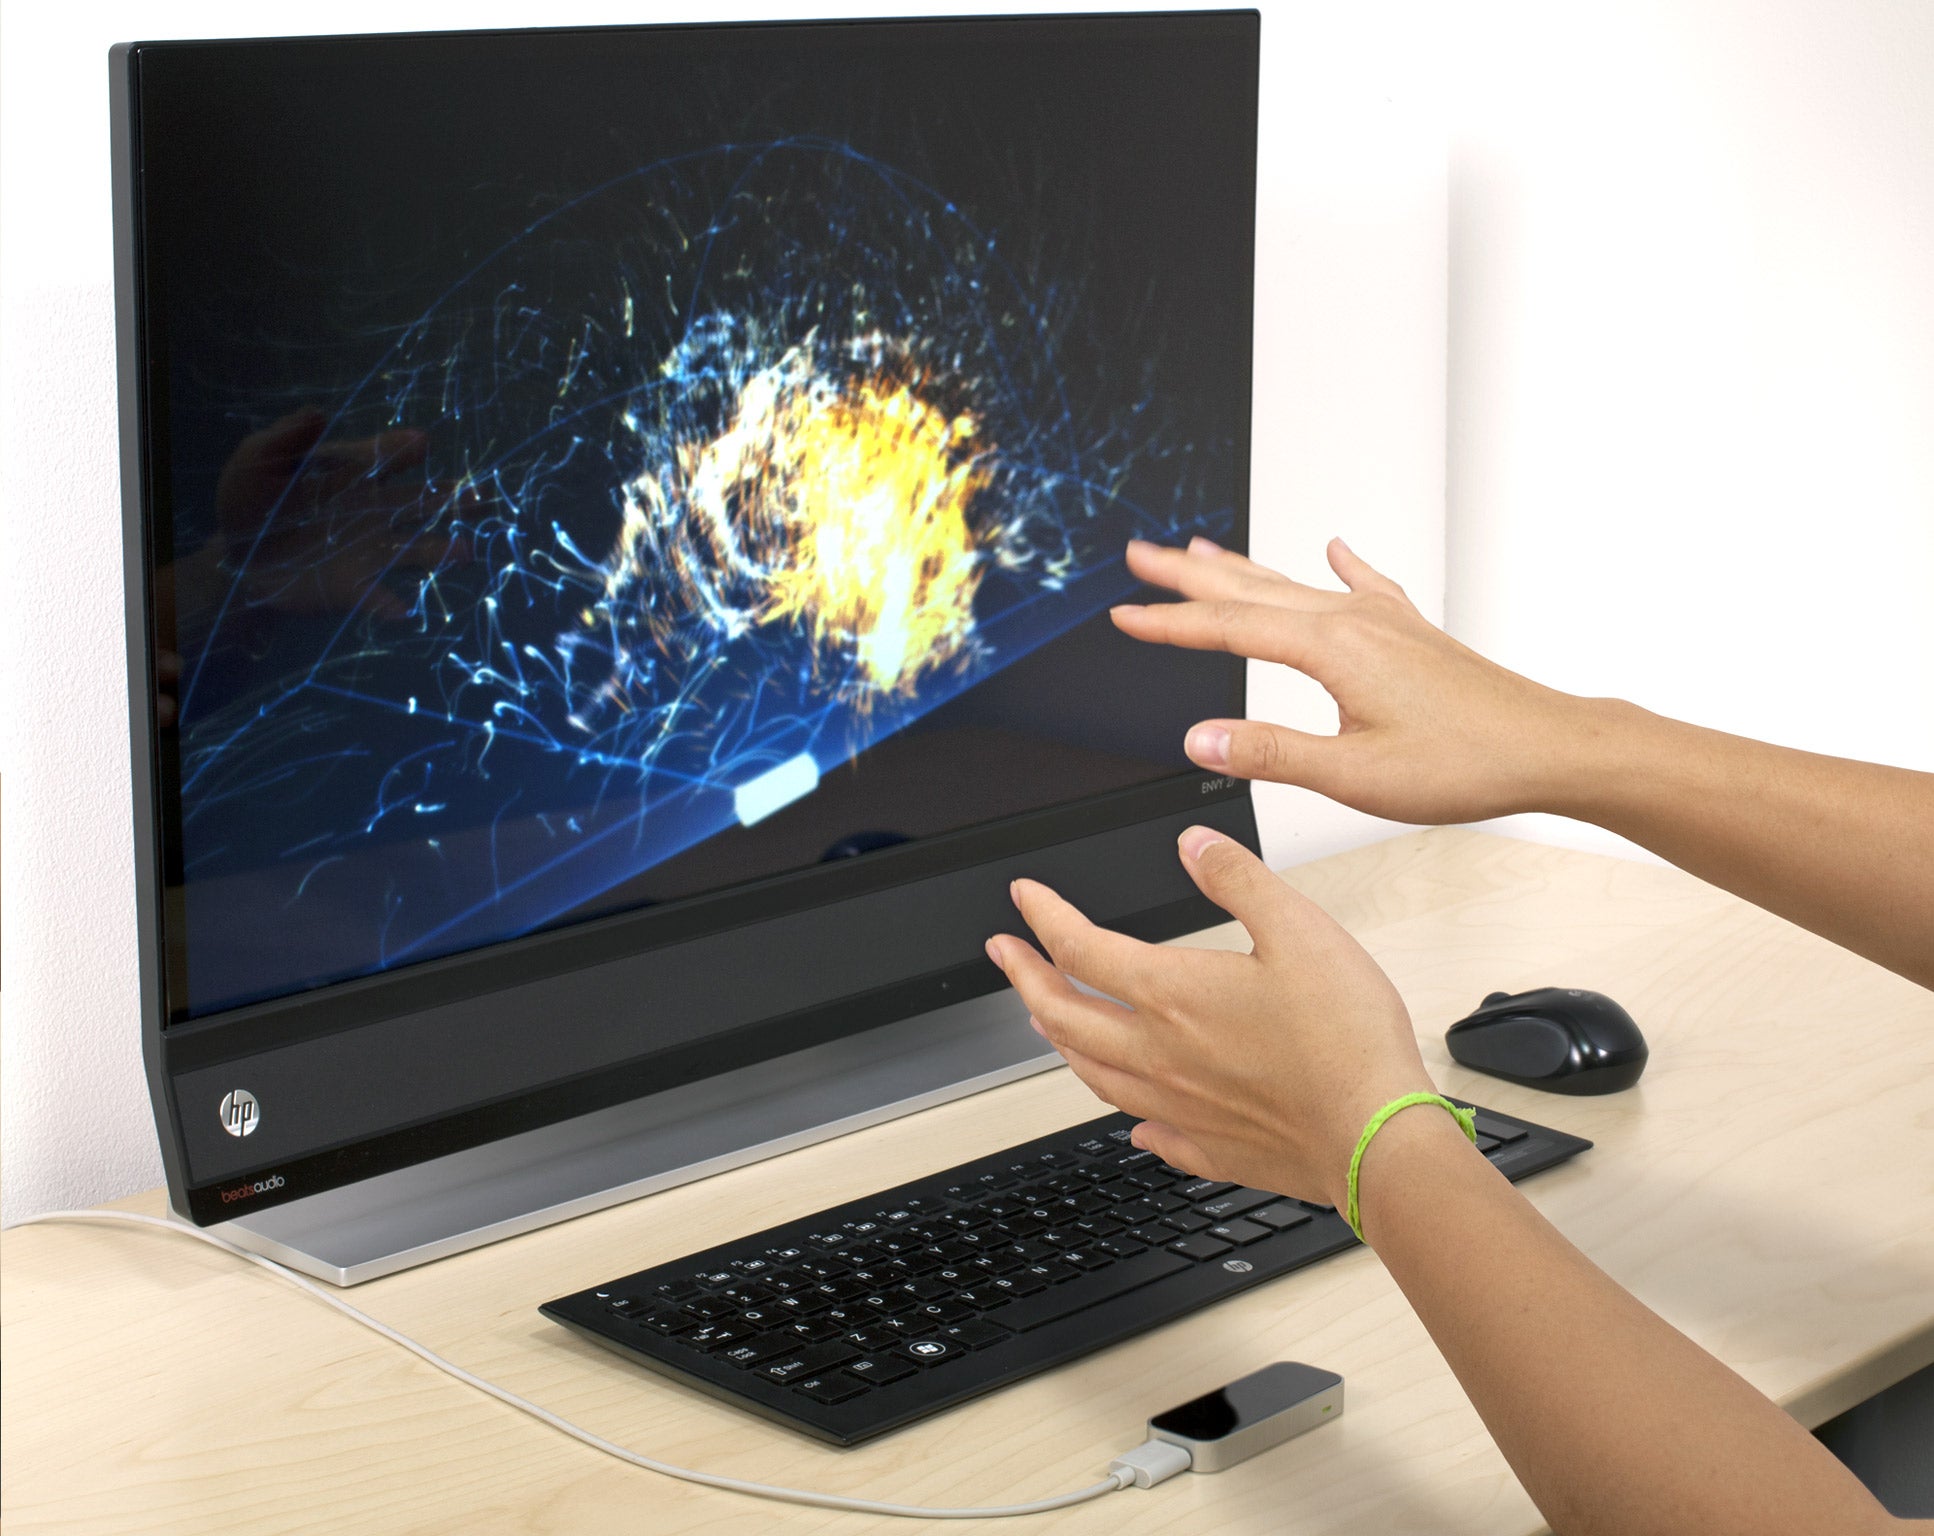 Wonder and frustration: the Leap Motion Controller in action